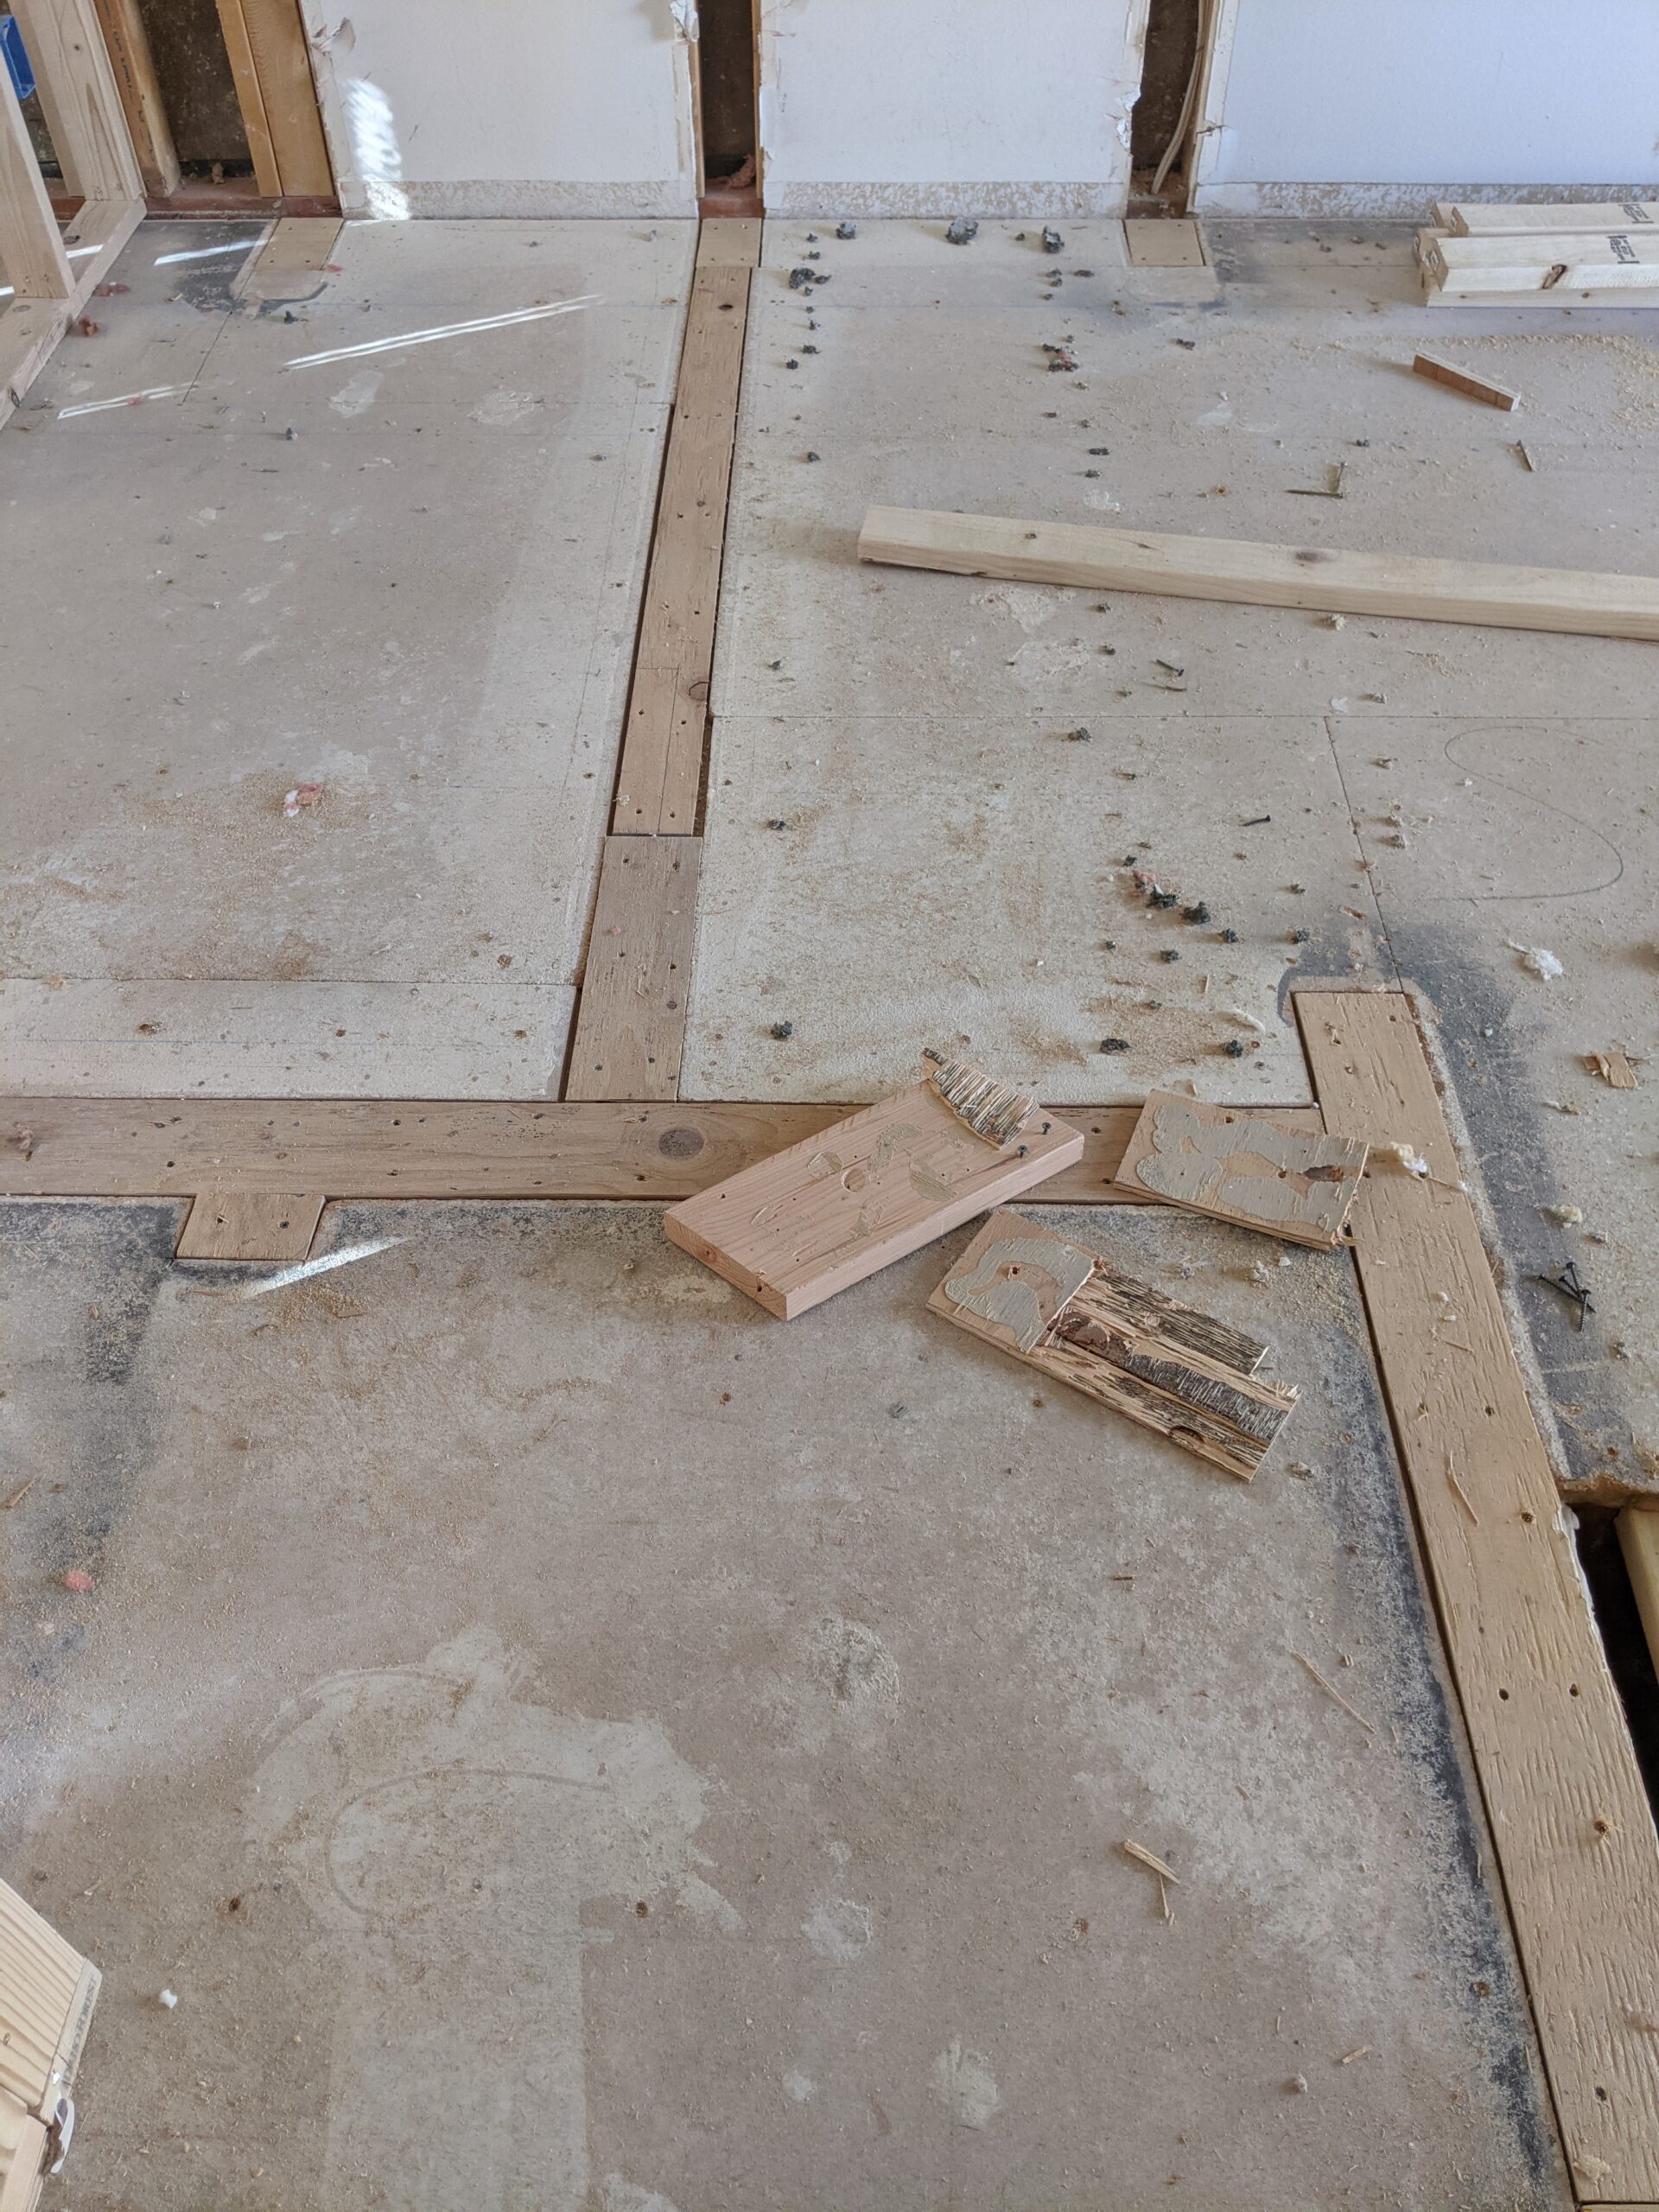 We removed the closet walls to combine 2 bedrooms, leaving voids in the subfloor. When installing floating floors, you can simply fill in these gaps with 2”x4” boards. If we picked flooring that attaches directly to the subfloor, we would have to replace the entire subfloor with new lumber to make it completely level—a major cost!